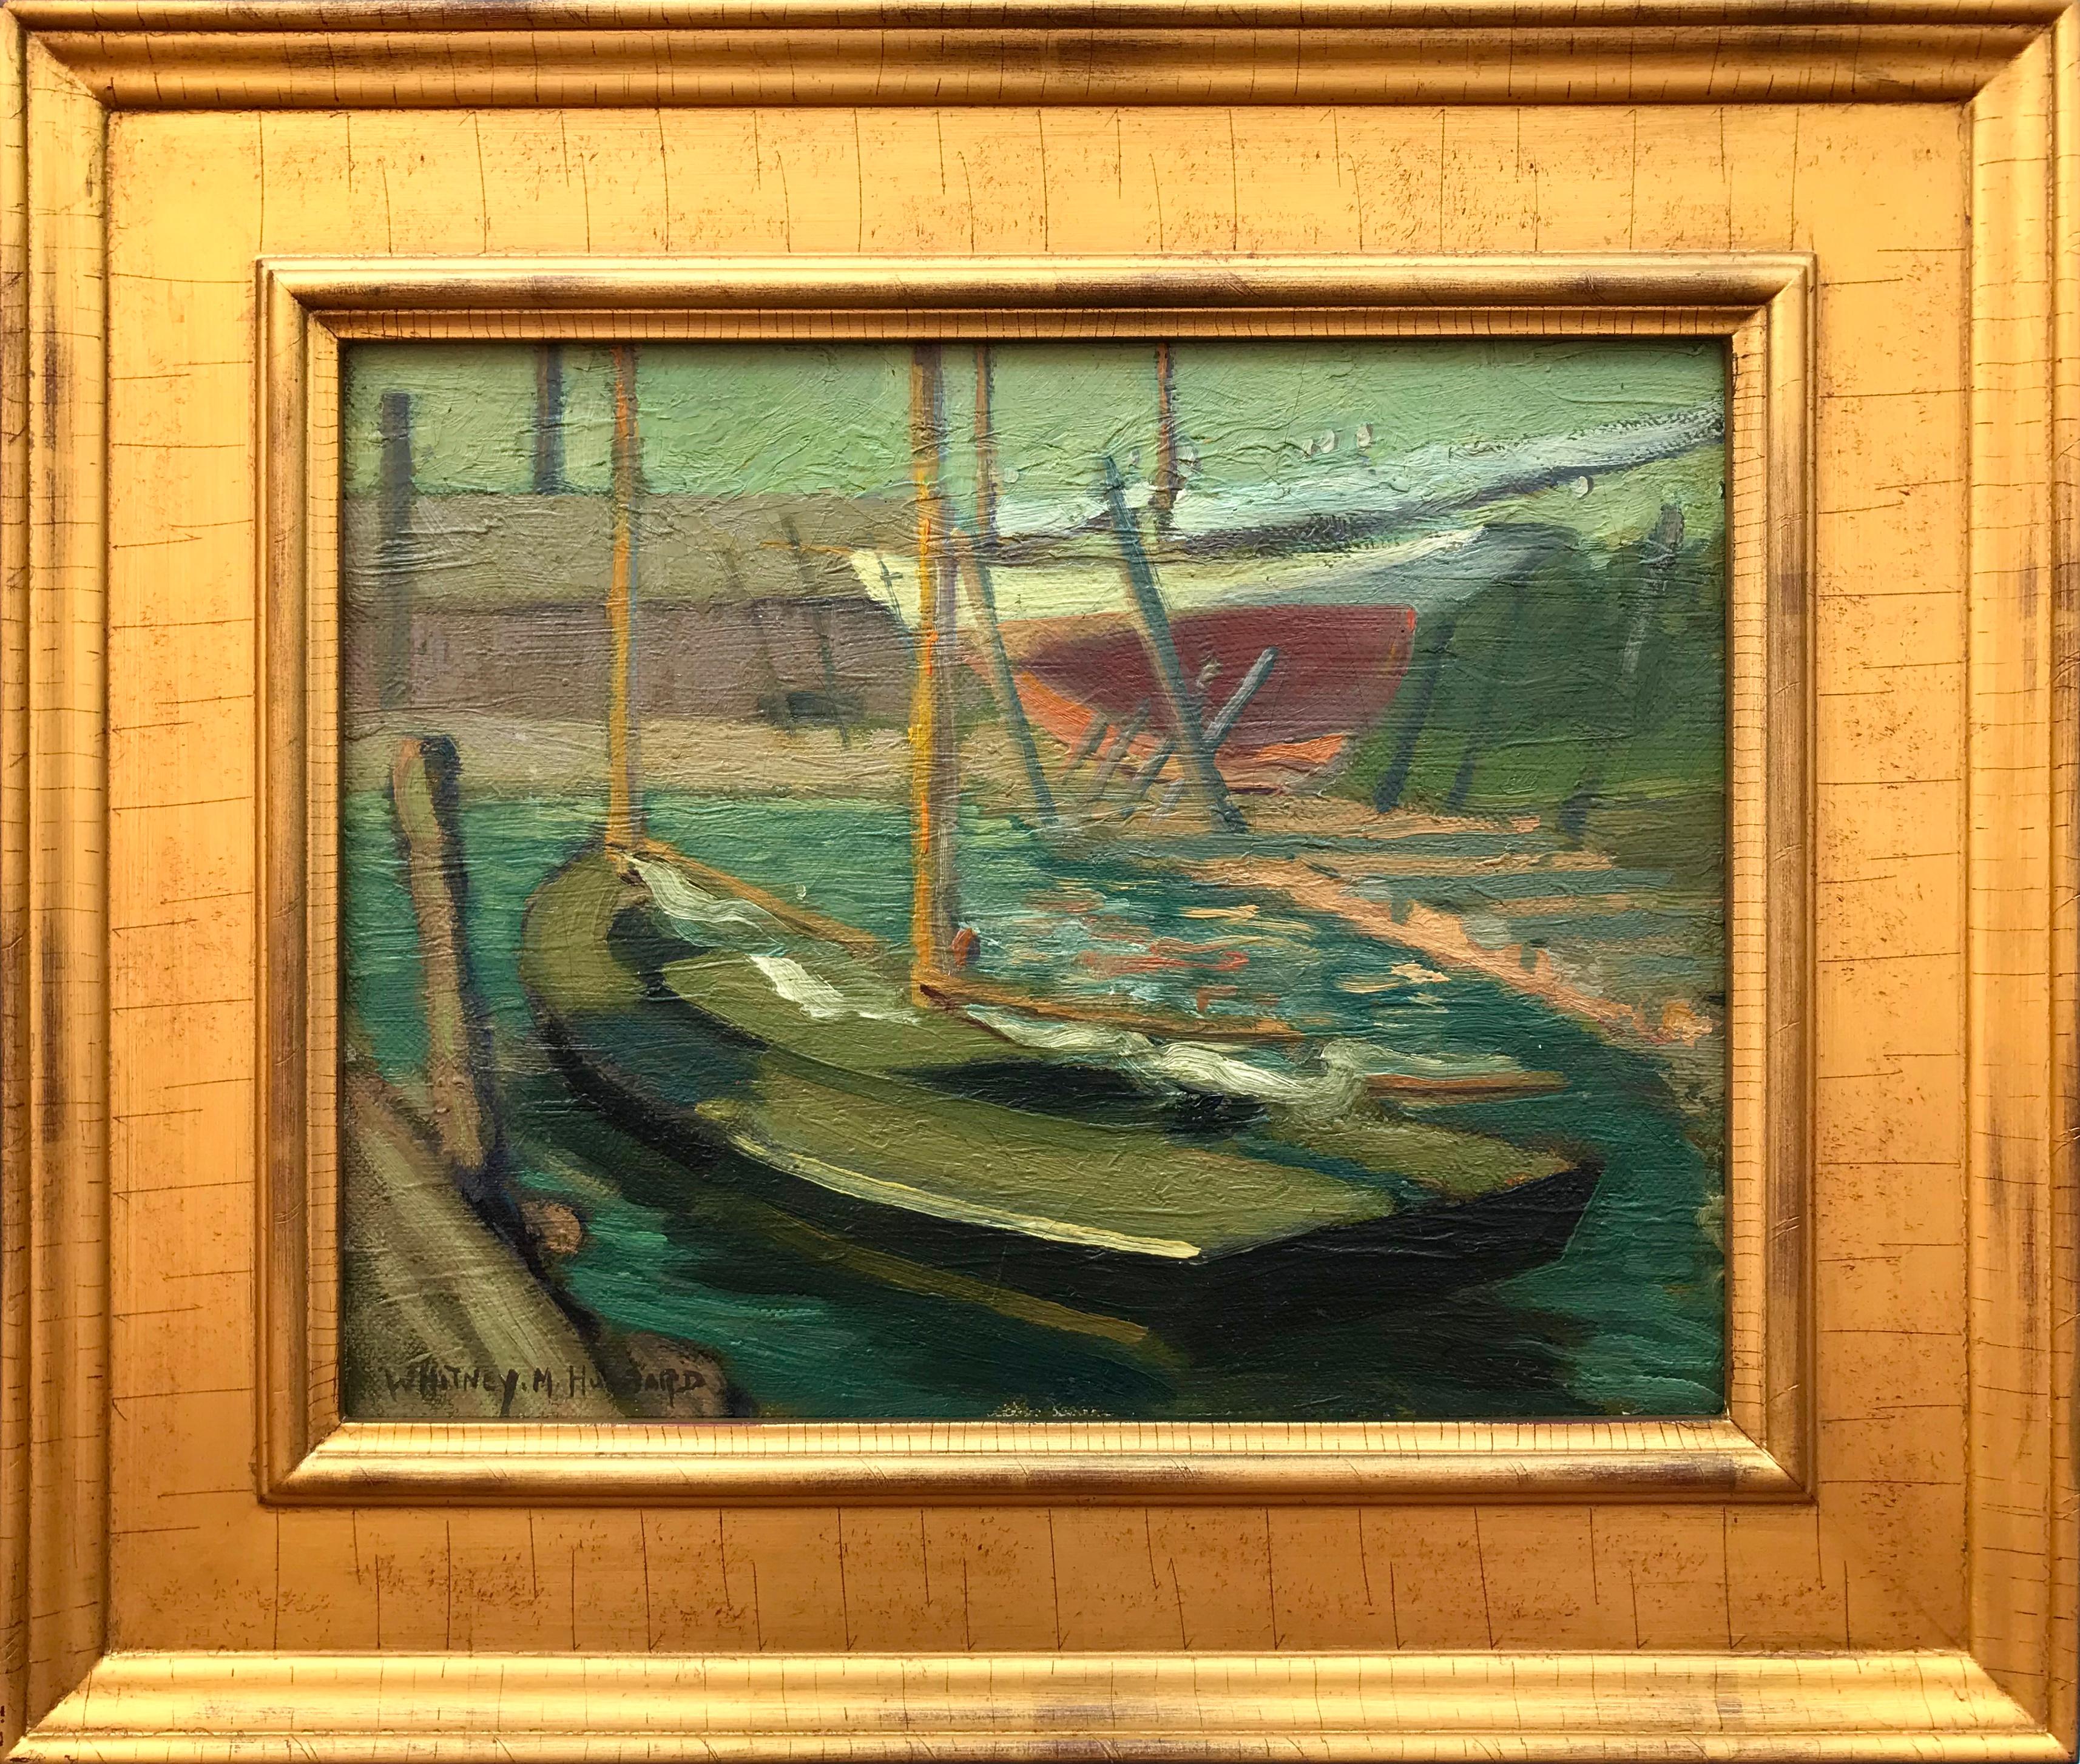 Oil paint on artist board painting of a sailboat docked in Greenport  Harbor, Long Island.  Signed lower left. Condition is very good.  Circa 1940. The painting is framed in a contemporary gold leaf with green painted insert. Measurements framed in